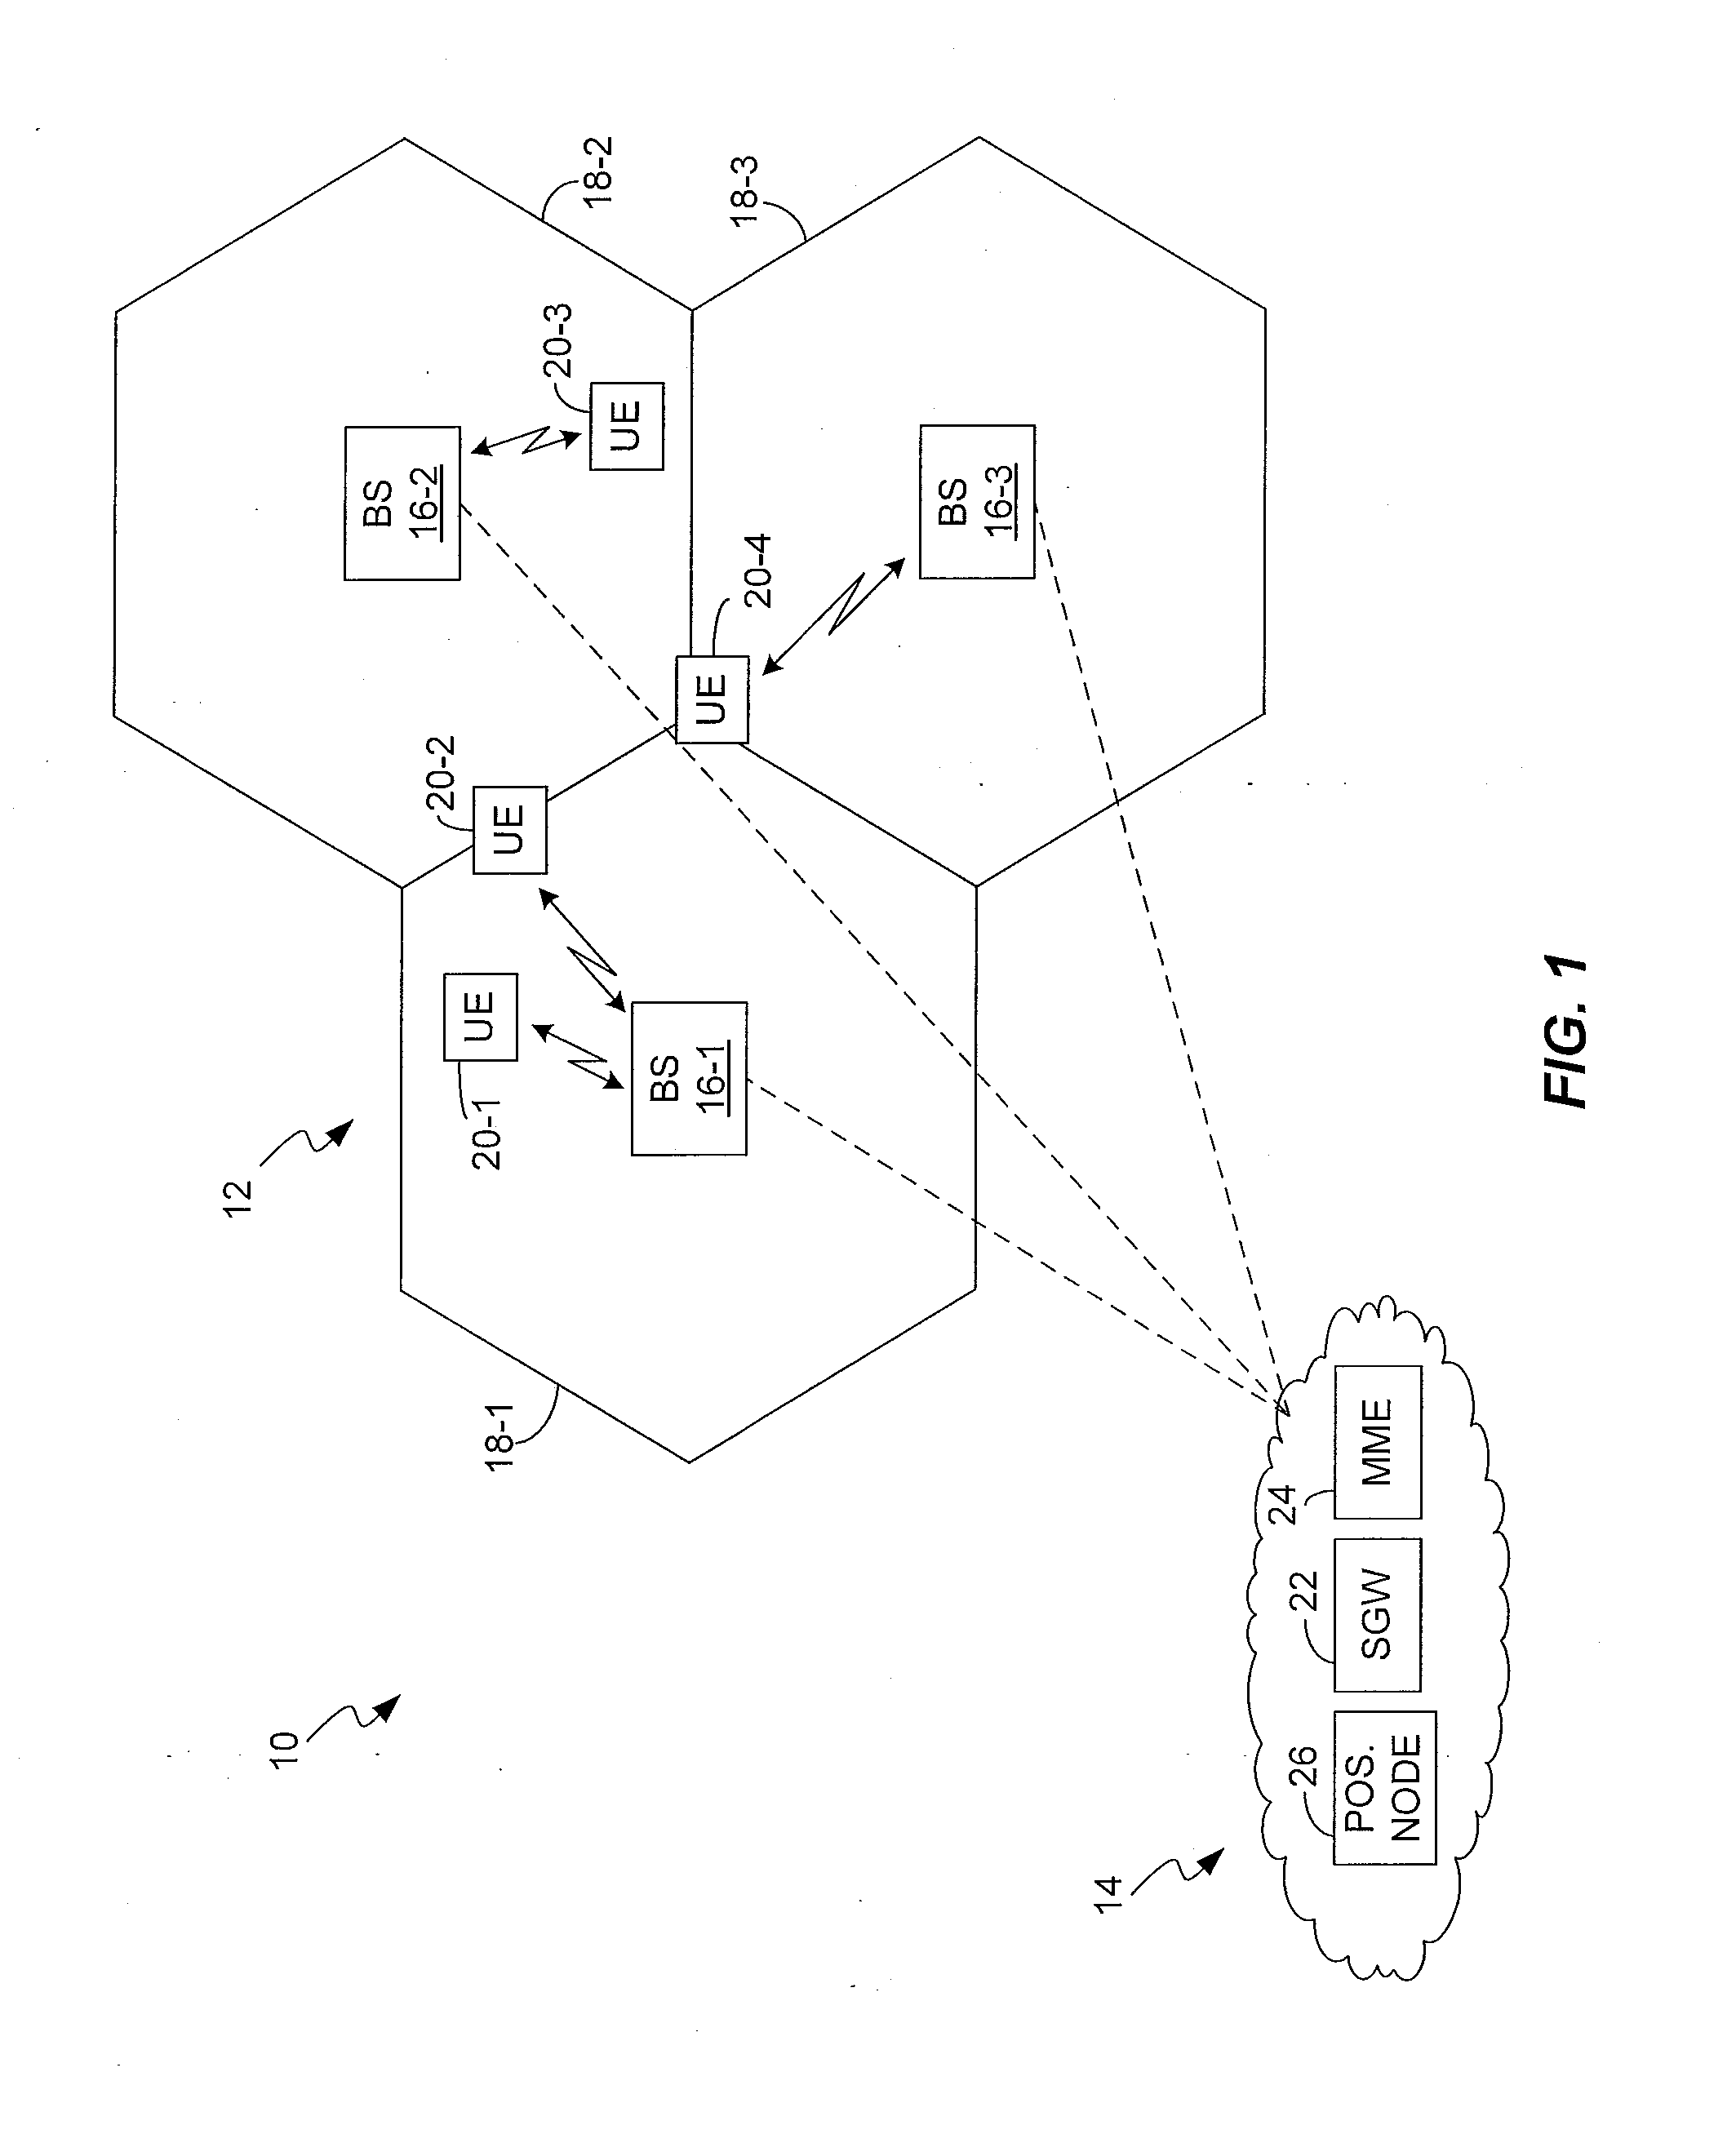 Method and Apparatus for Muting Signaling in a Wireless Communication Network